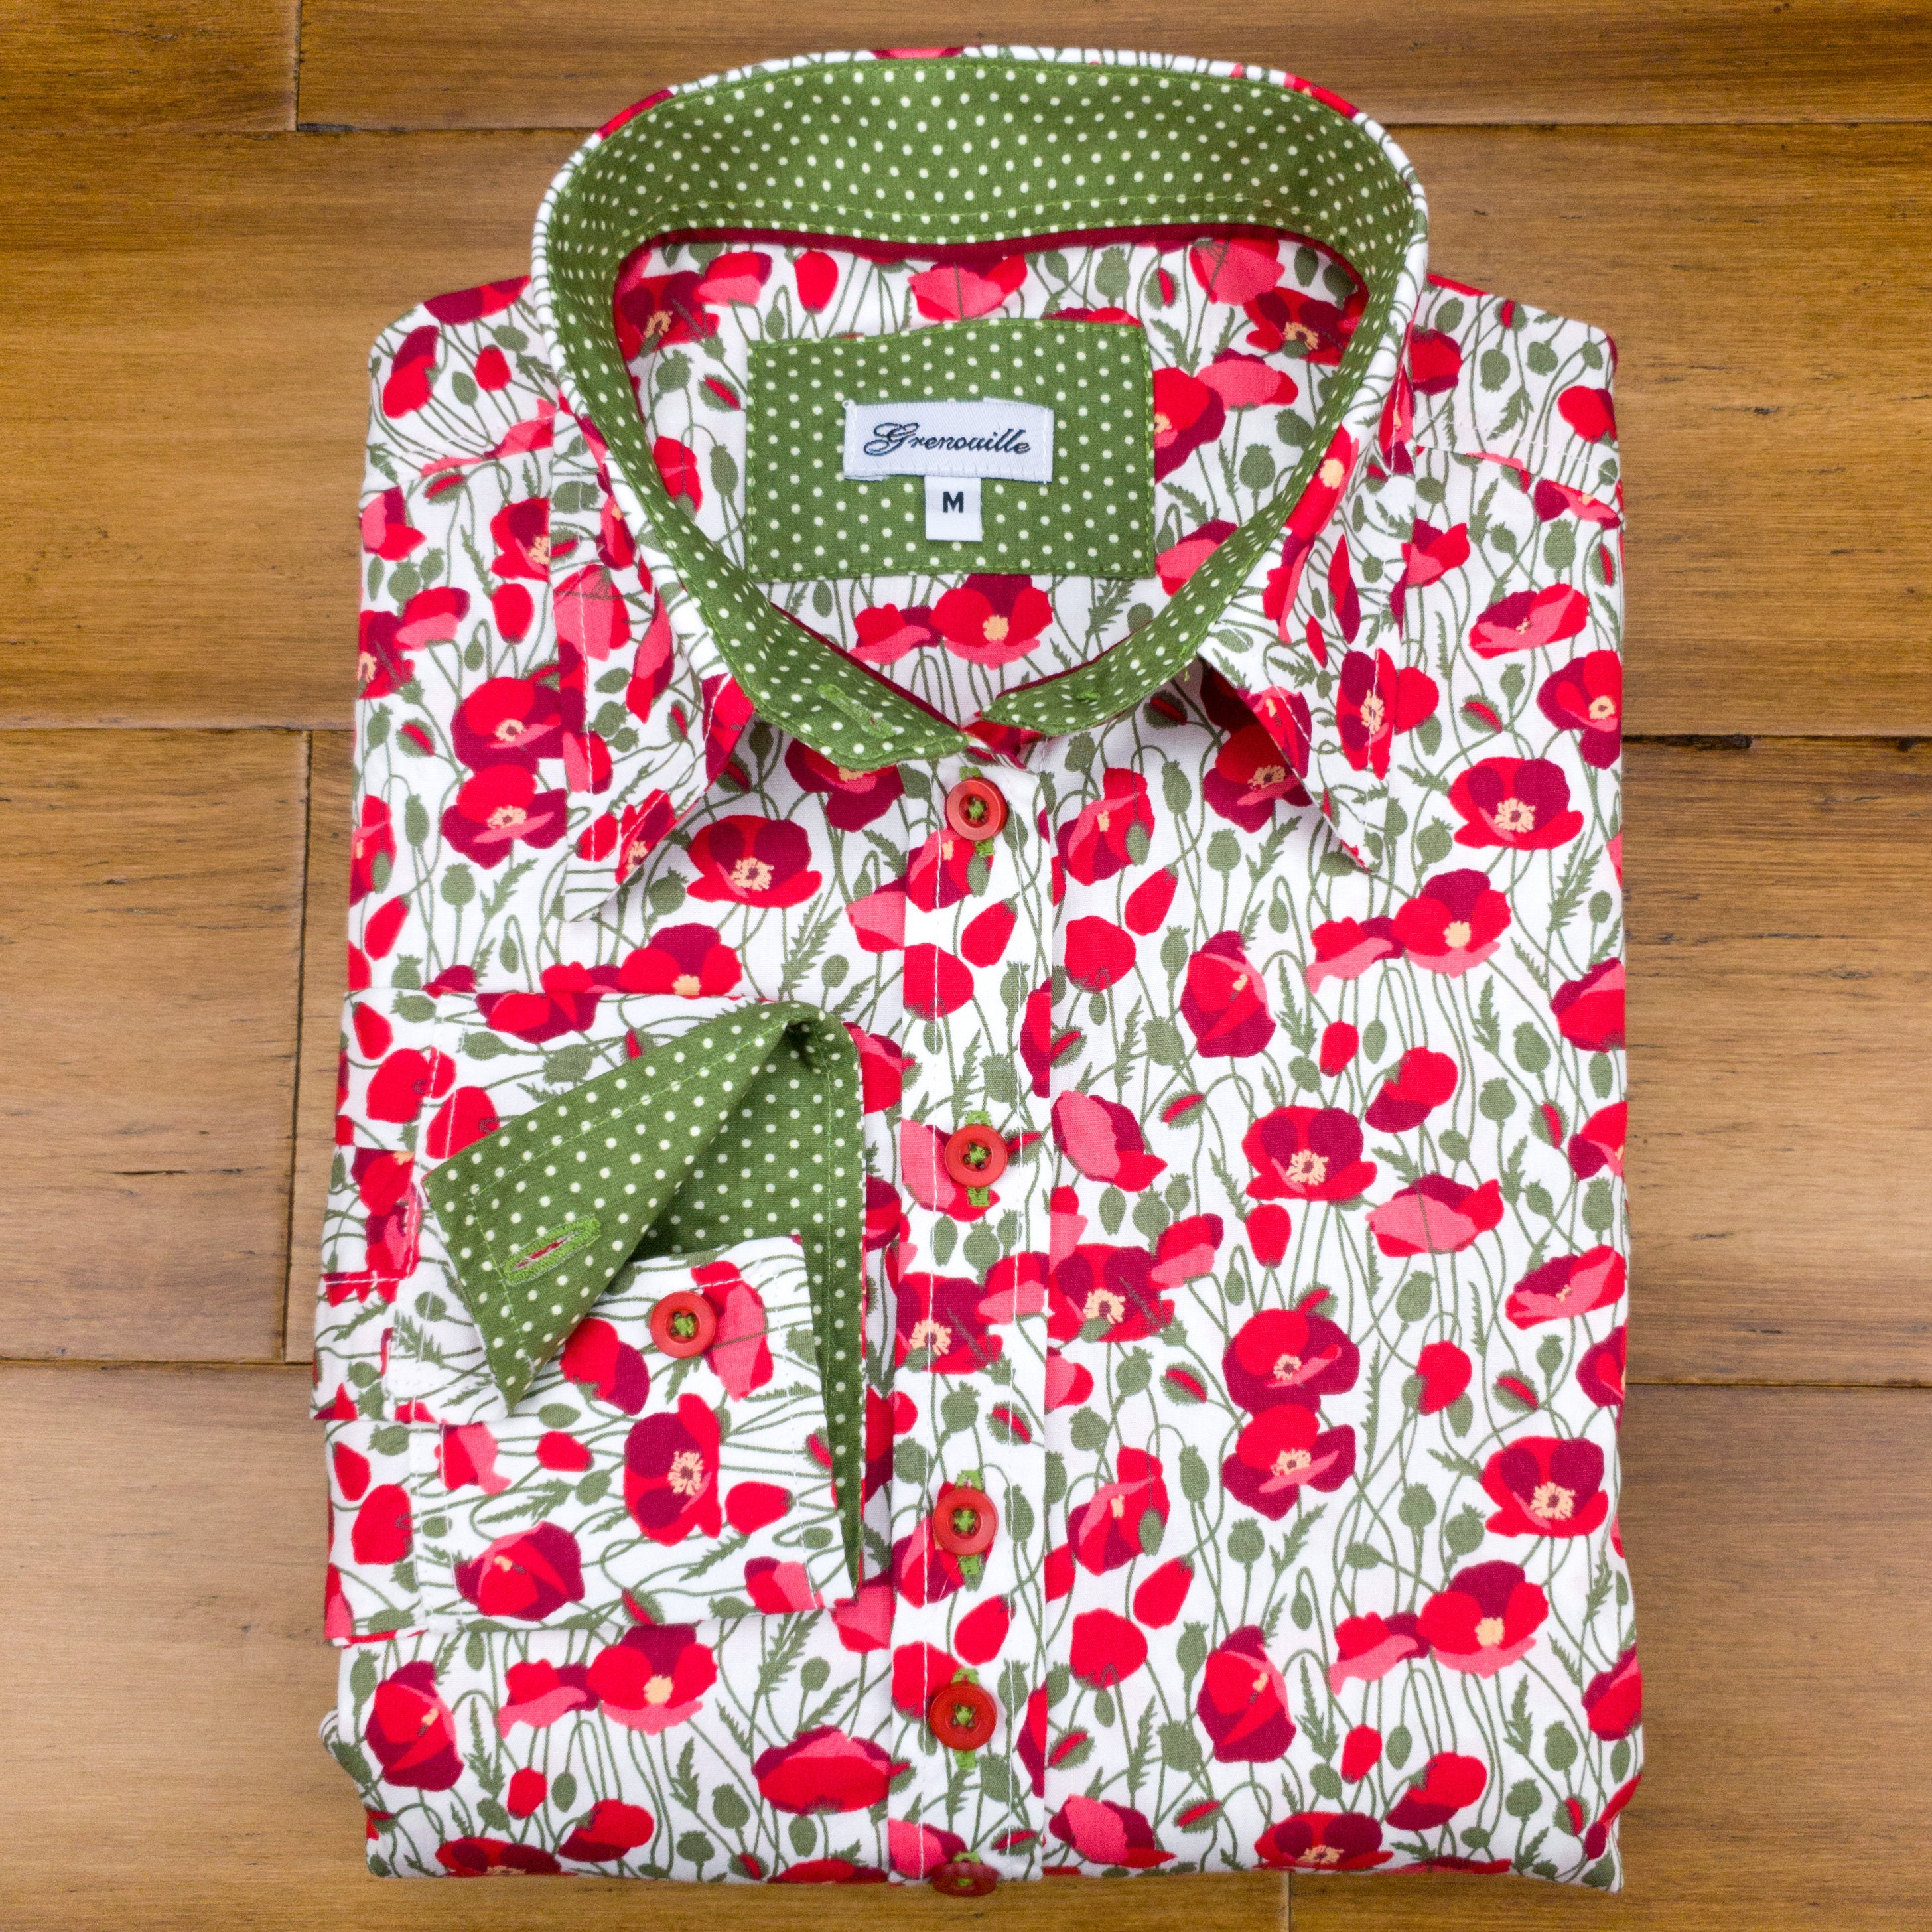 Grenouille Ladies Long Sleeve Red and Tiny White Flower Print Shirt - Size 42